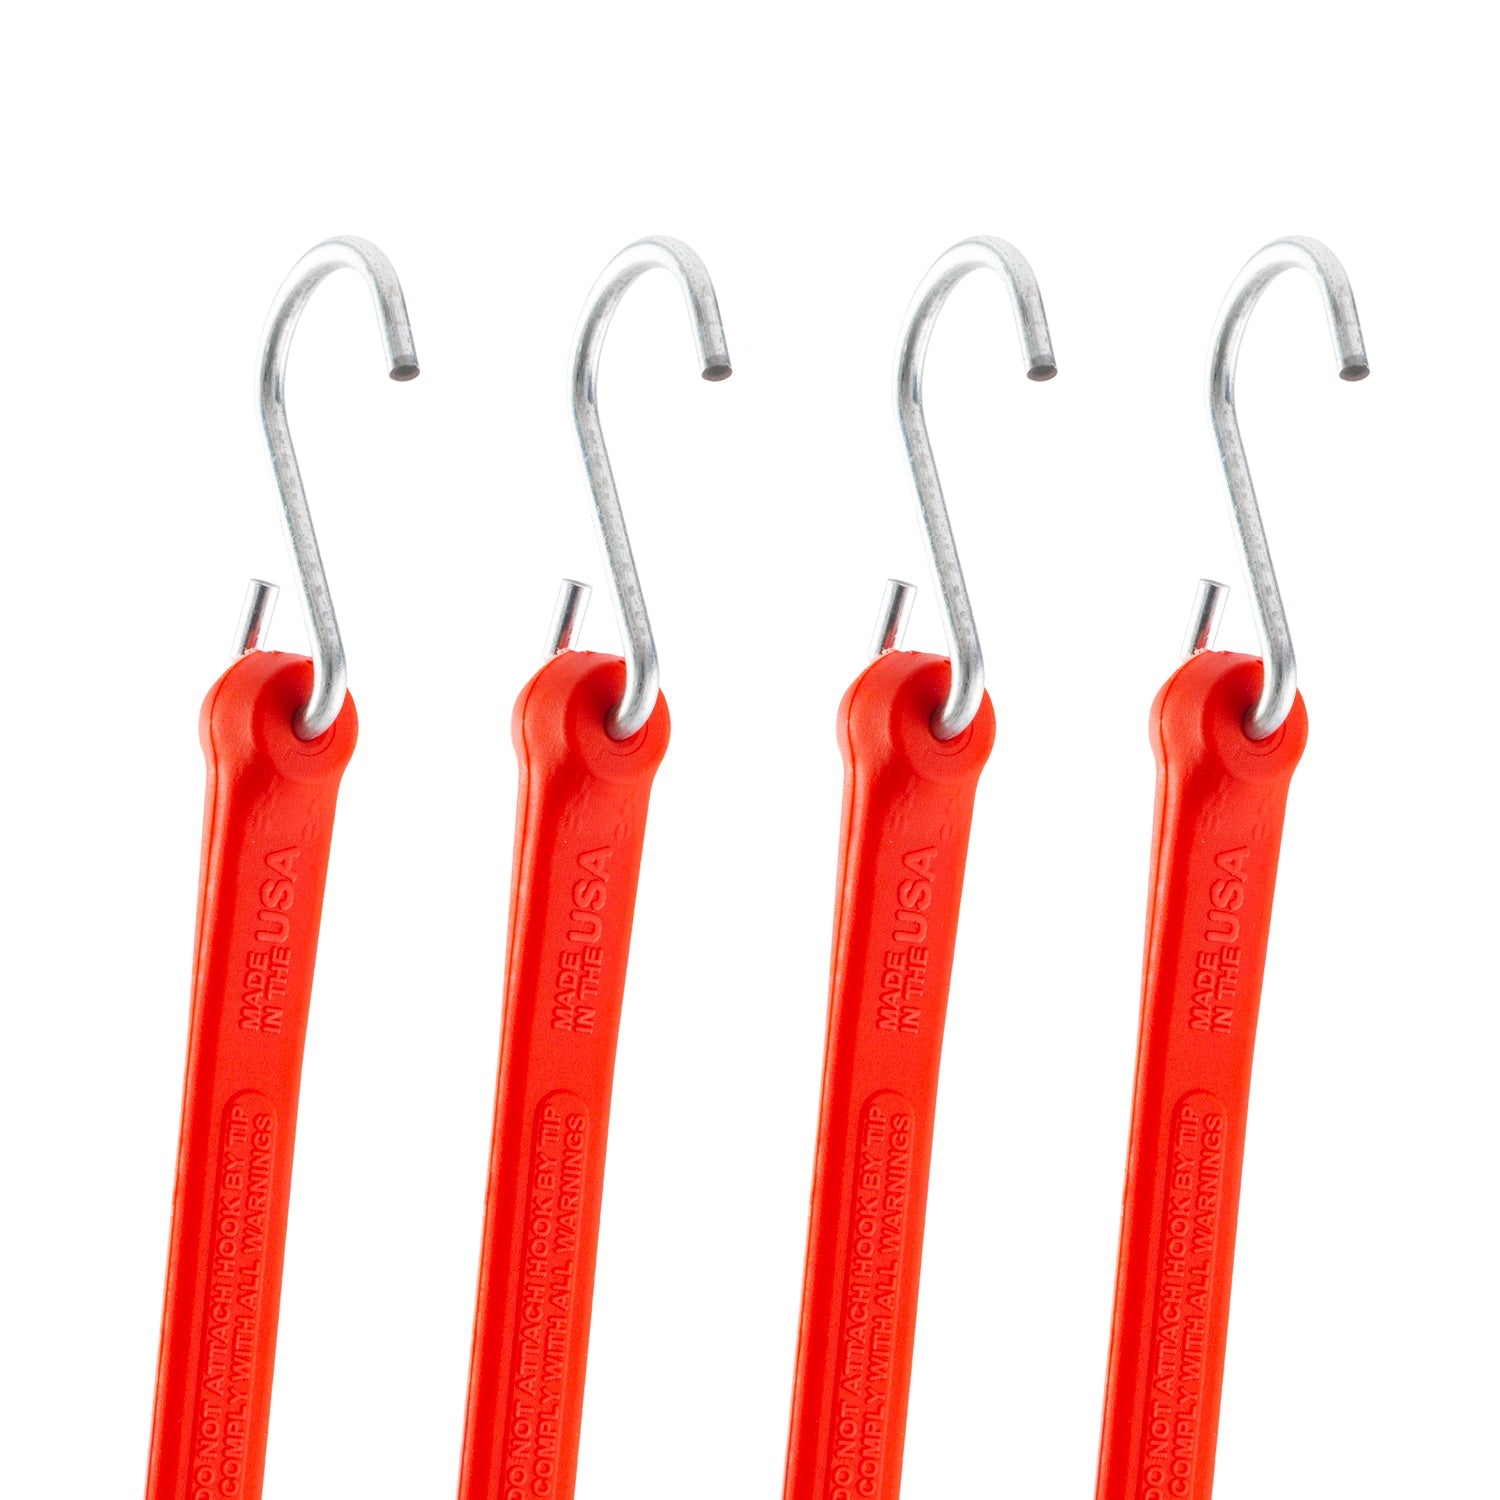 18" Heavy Duty Bungee Strap 4 Pack - The Perfect Bungee & ShockStrap Tie Downs